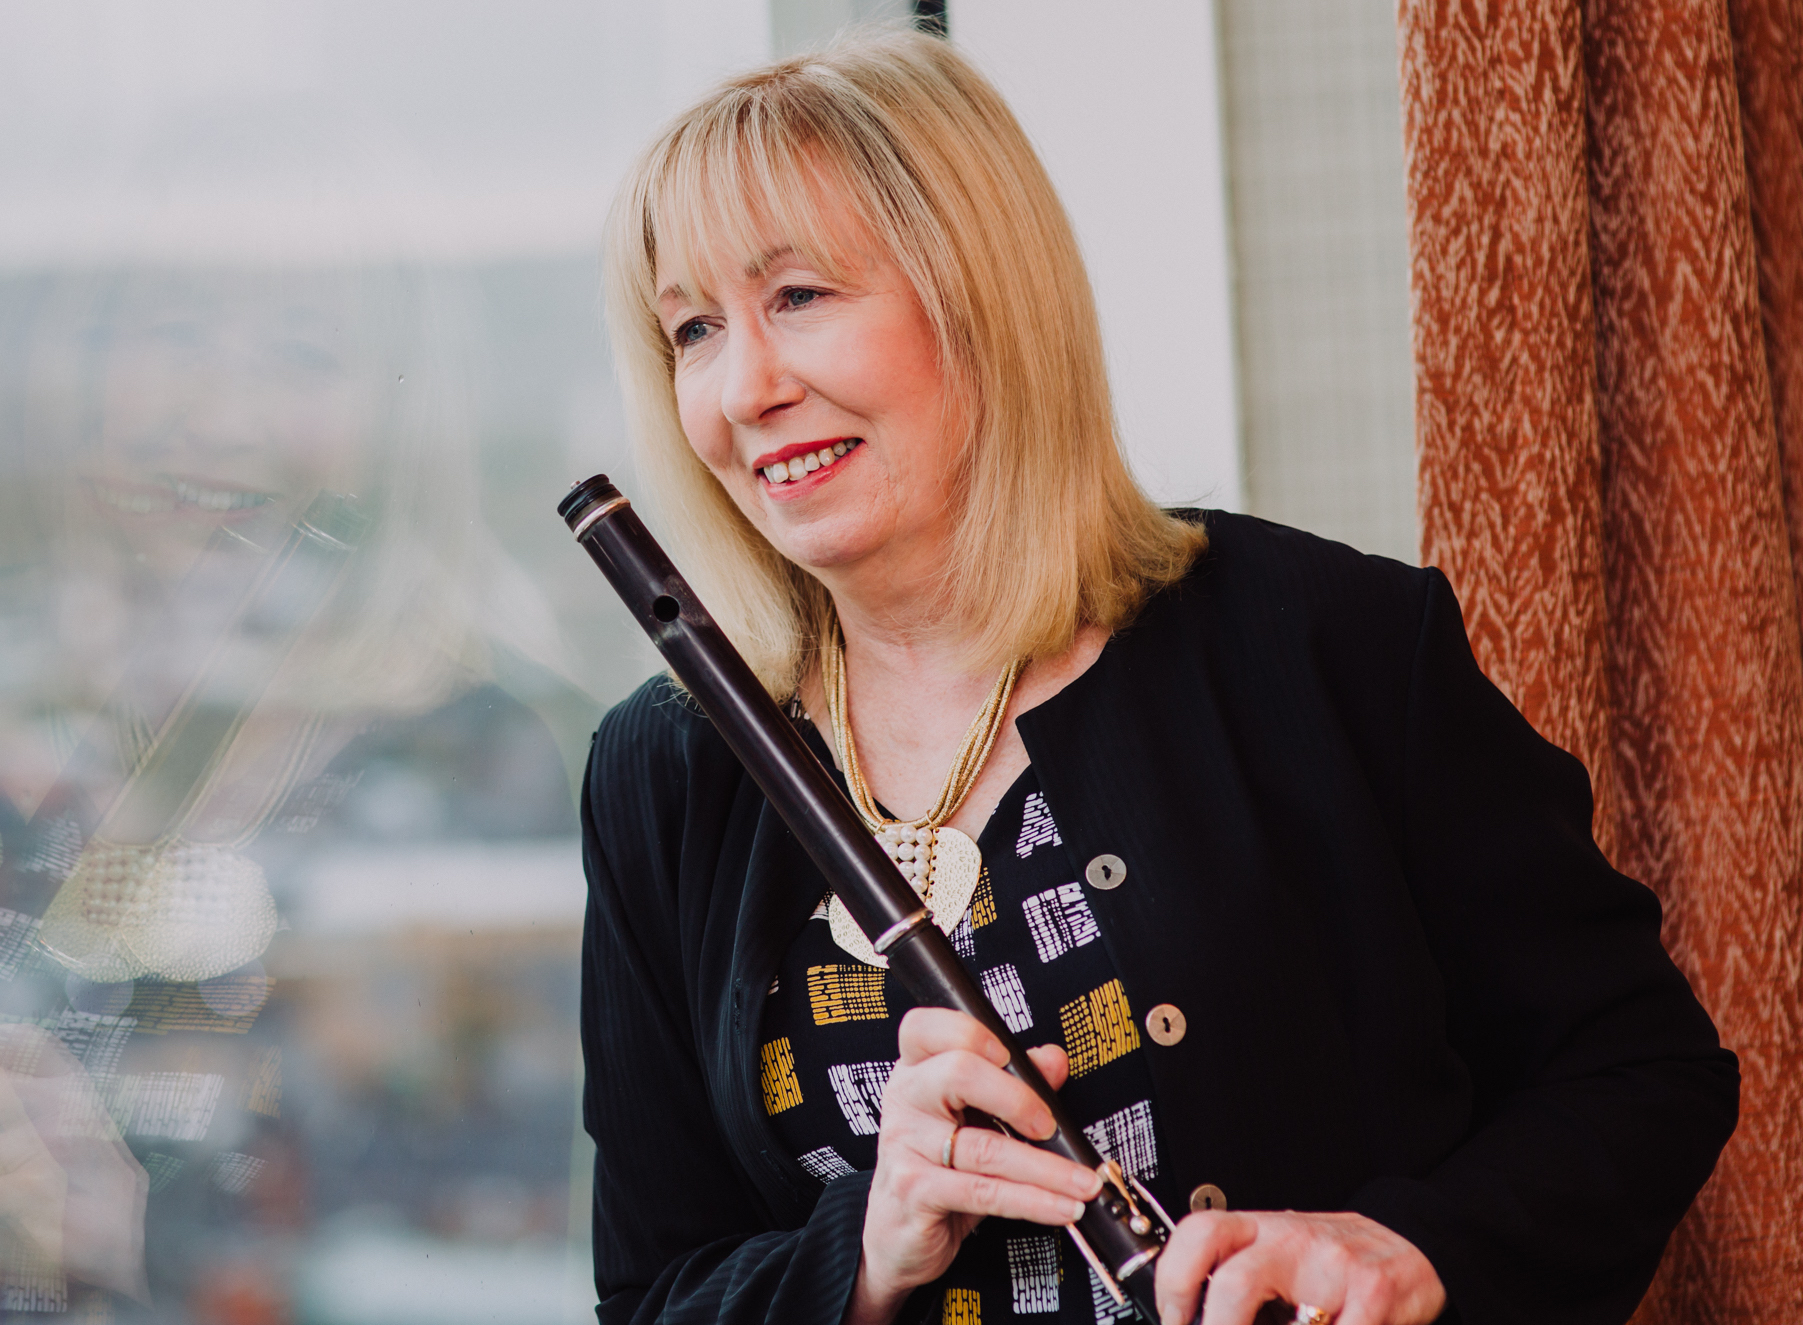 Flute-player Catherine McEvoy Announced as TG4 Gradam Ceoil Musician of the Year